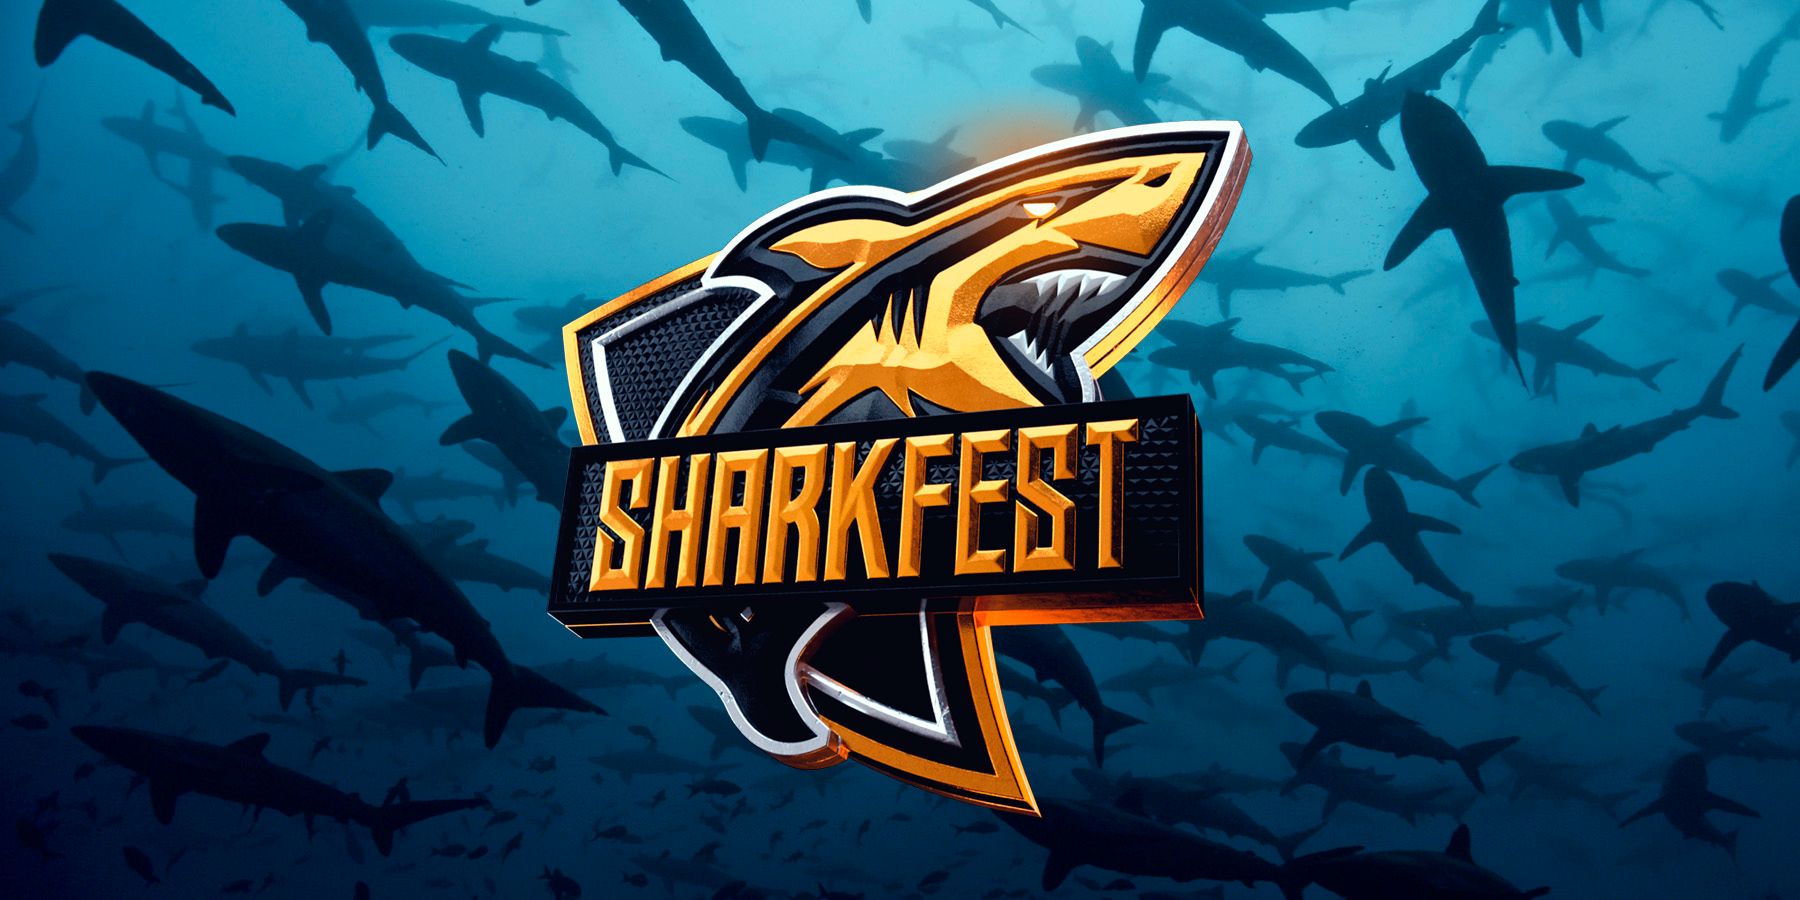 National Geographic to Launch Five Weeks of SHARKFEST 2020 Programming